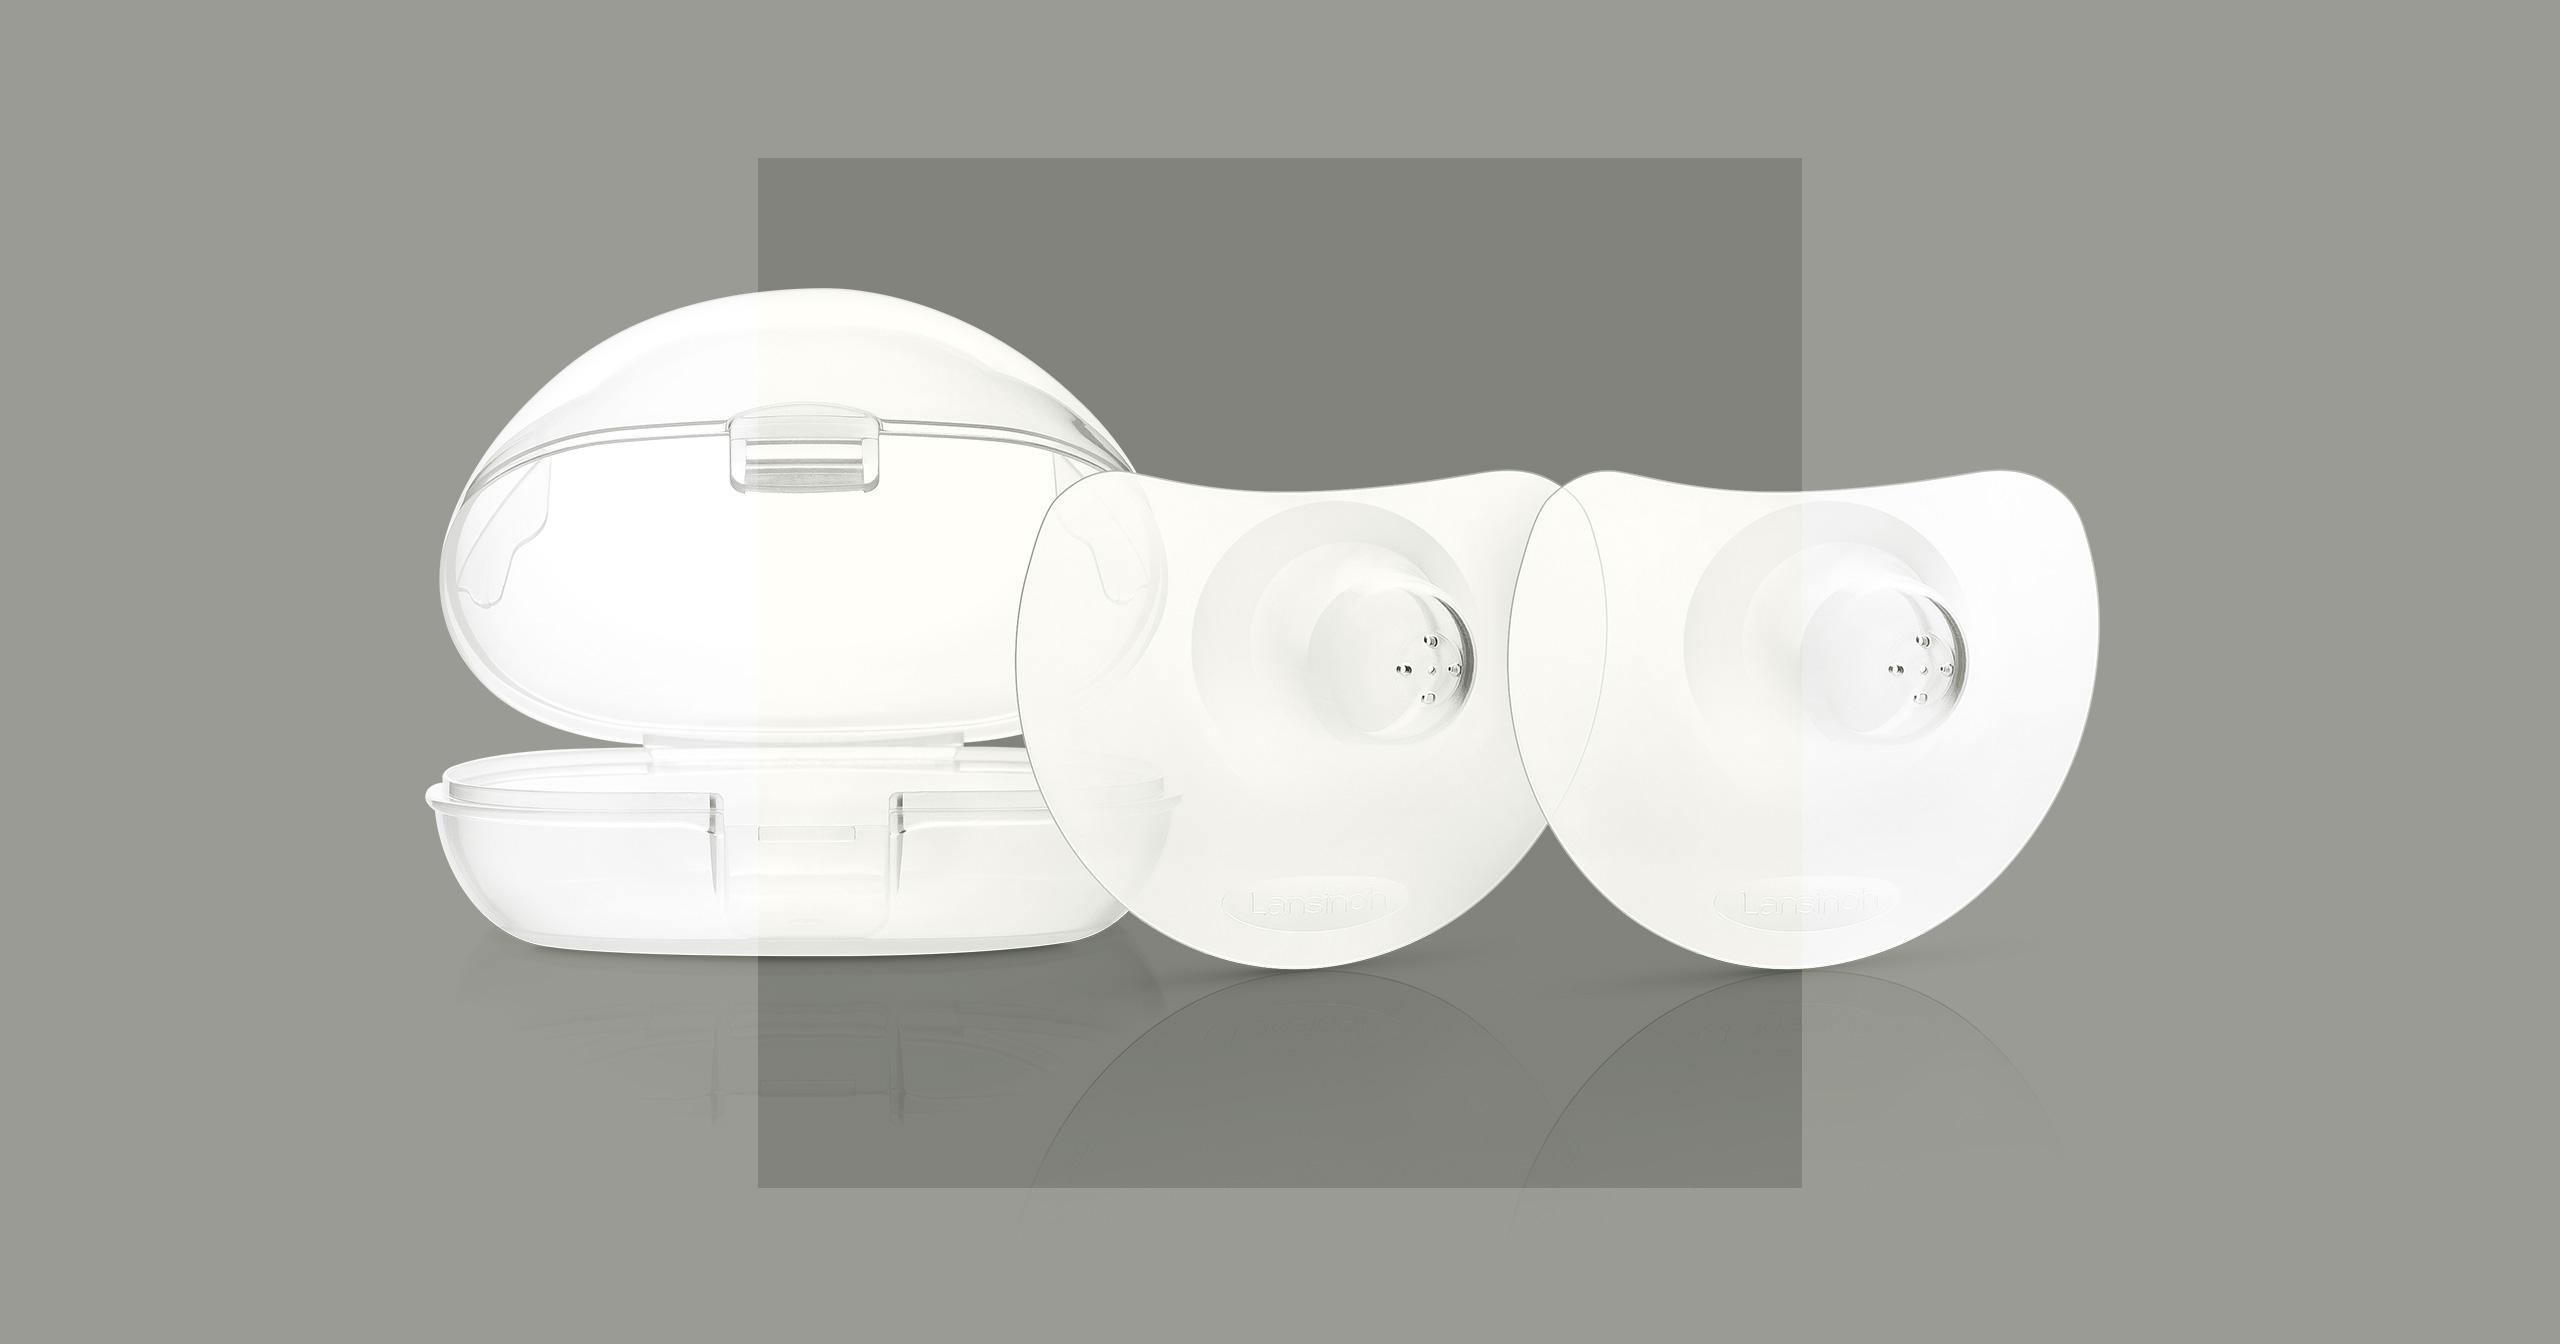 Nipple shields product photography - content creation for healthcare and maternity brand